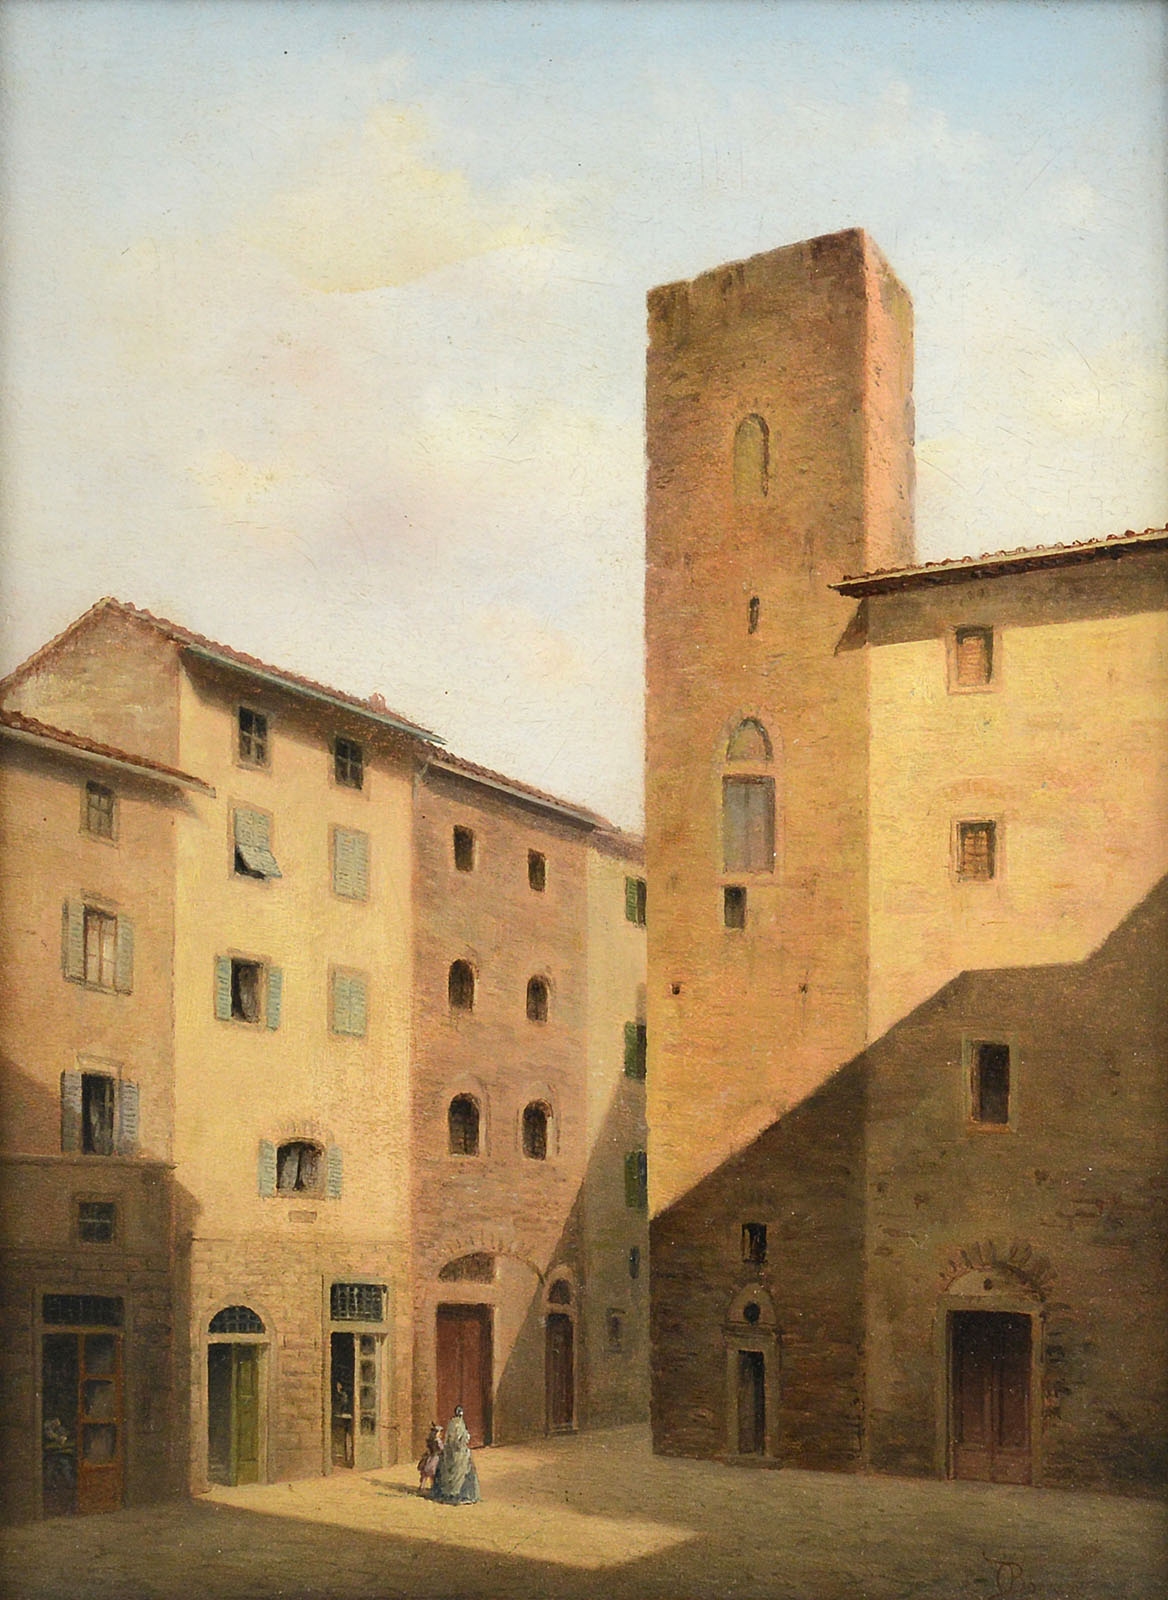 Medieval square with tower and figures - Odoardo Borrani